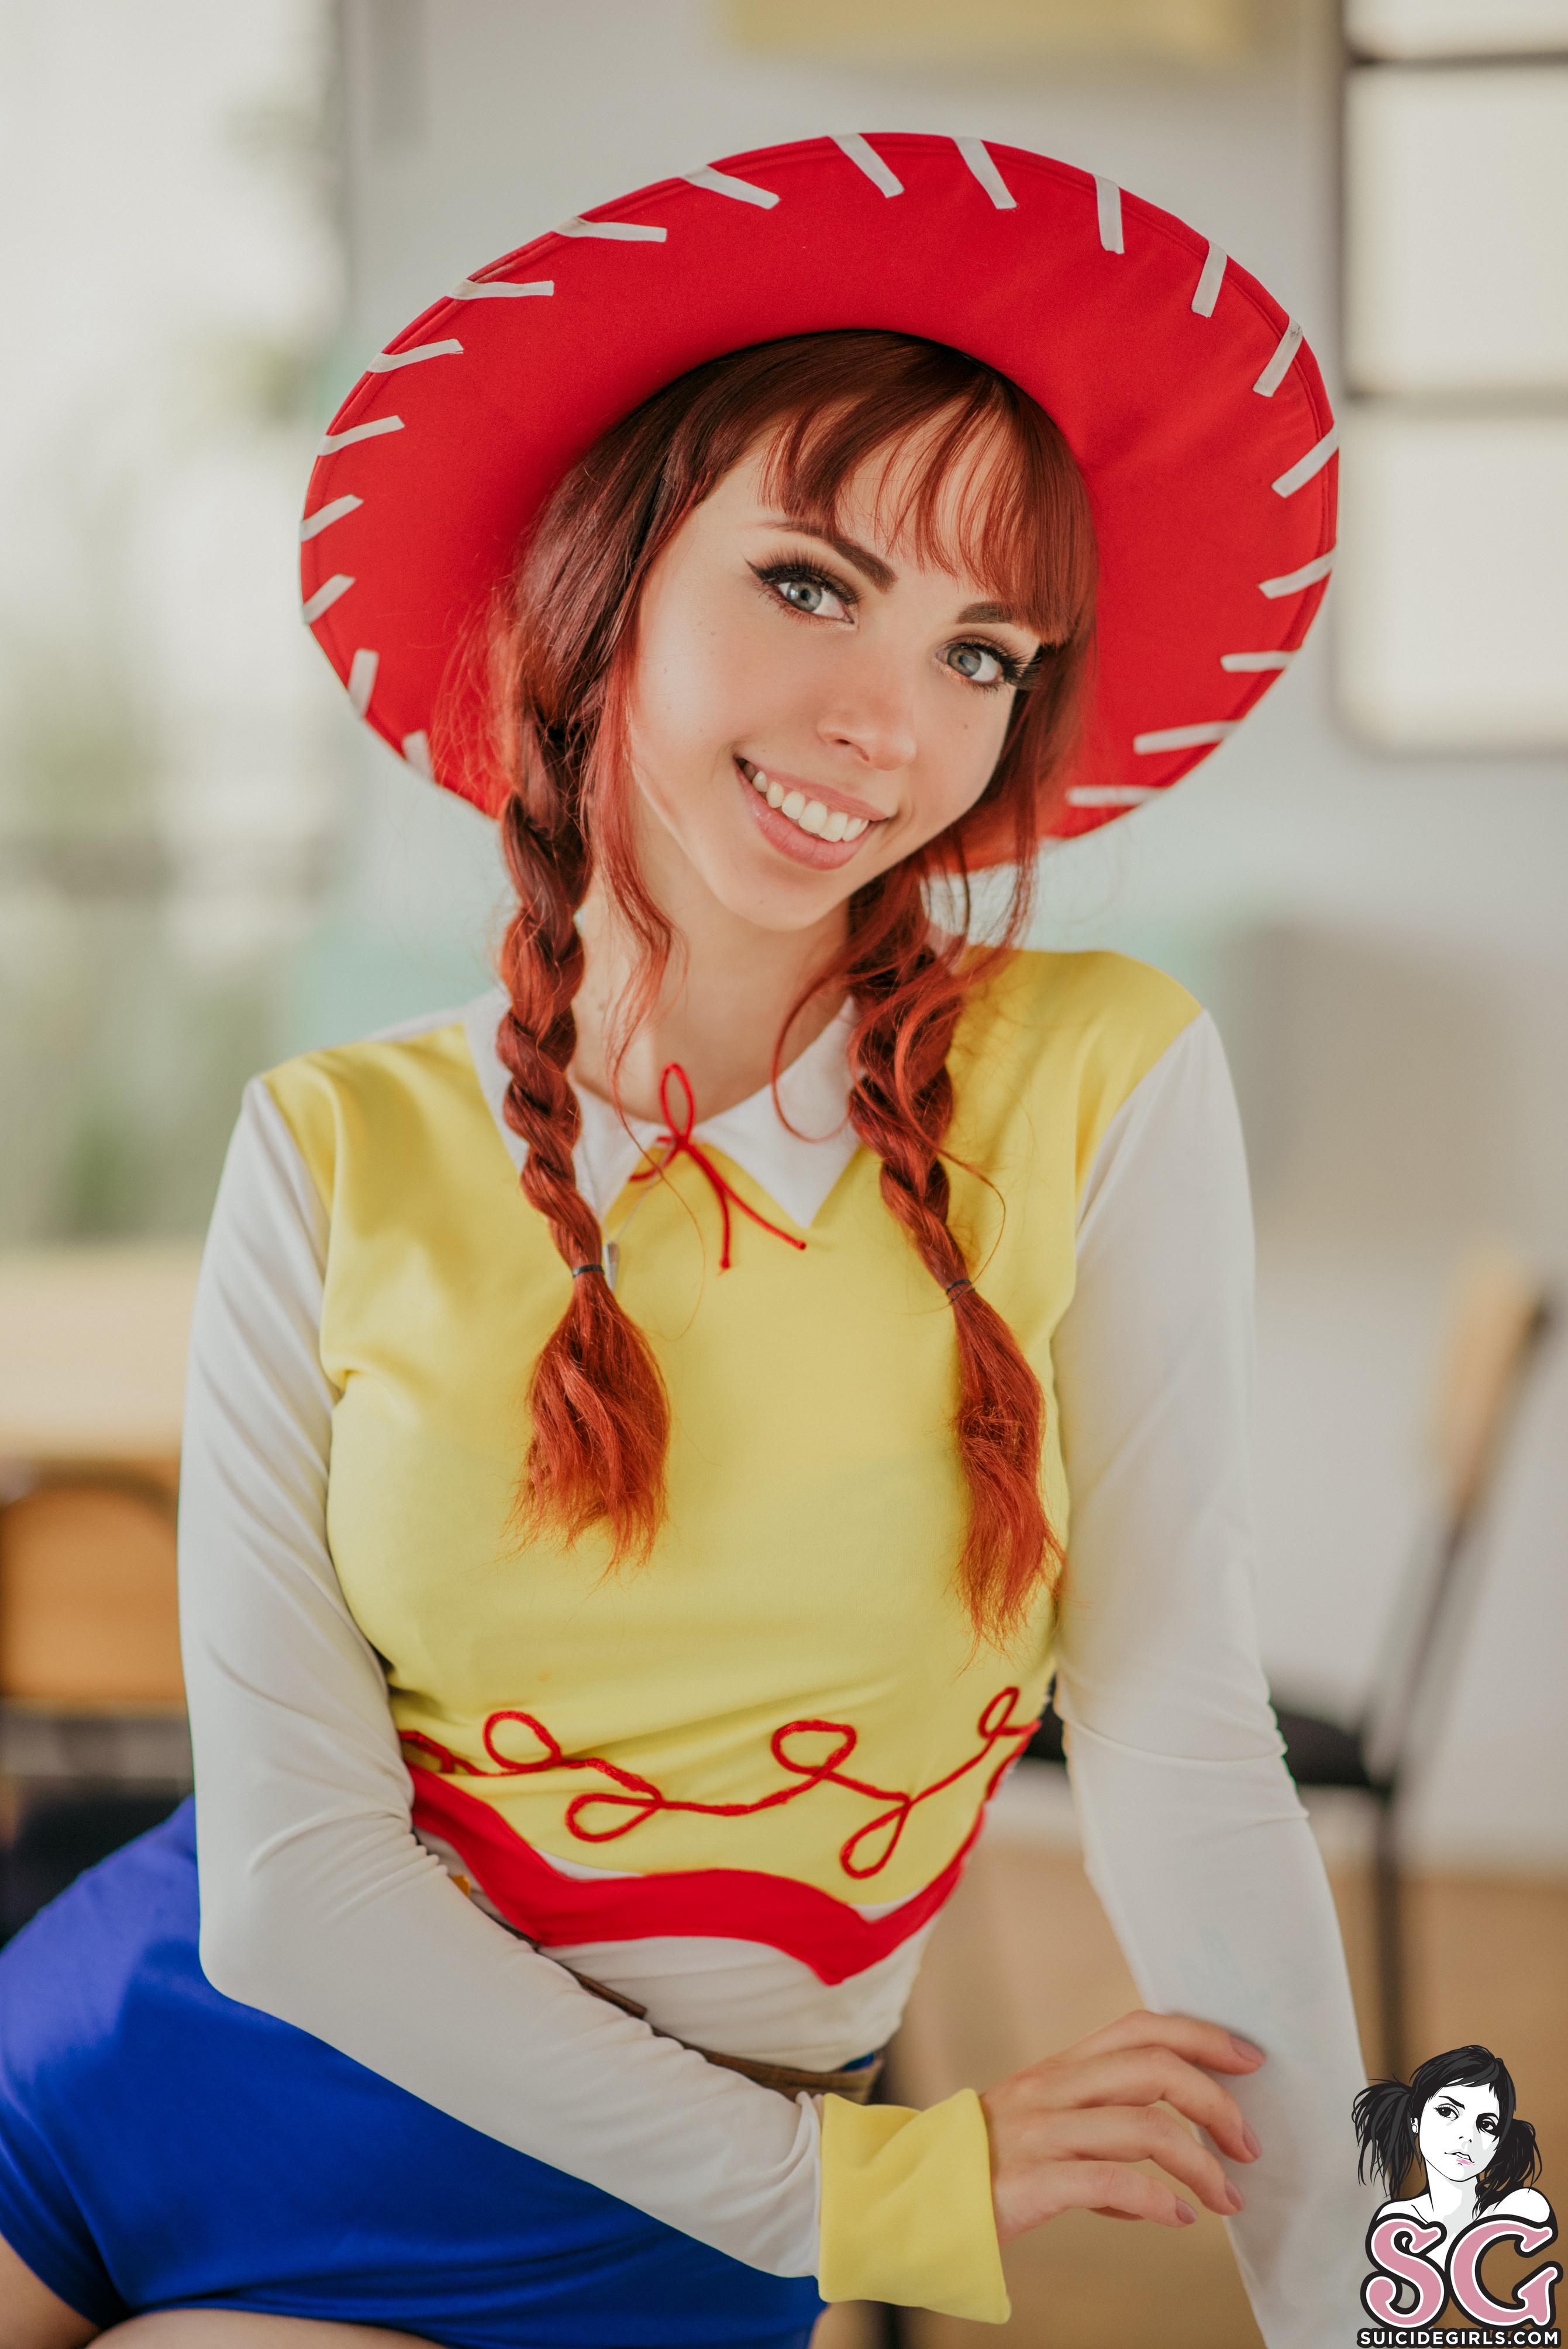 People 2681x4016 Blizzard Suicide women redhead cosplay Toy Story 2 women indoors blouses shorts window blurred Suicide Girls green eyes Jessie (Toy Story)